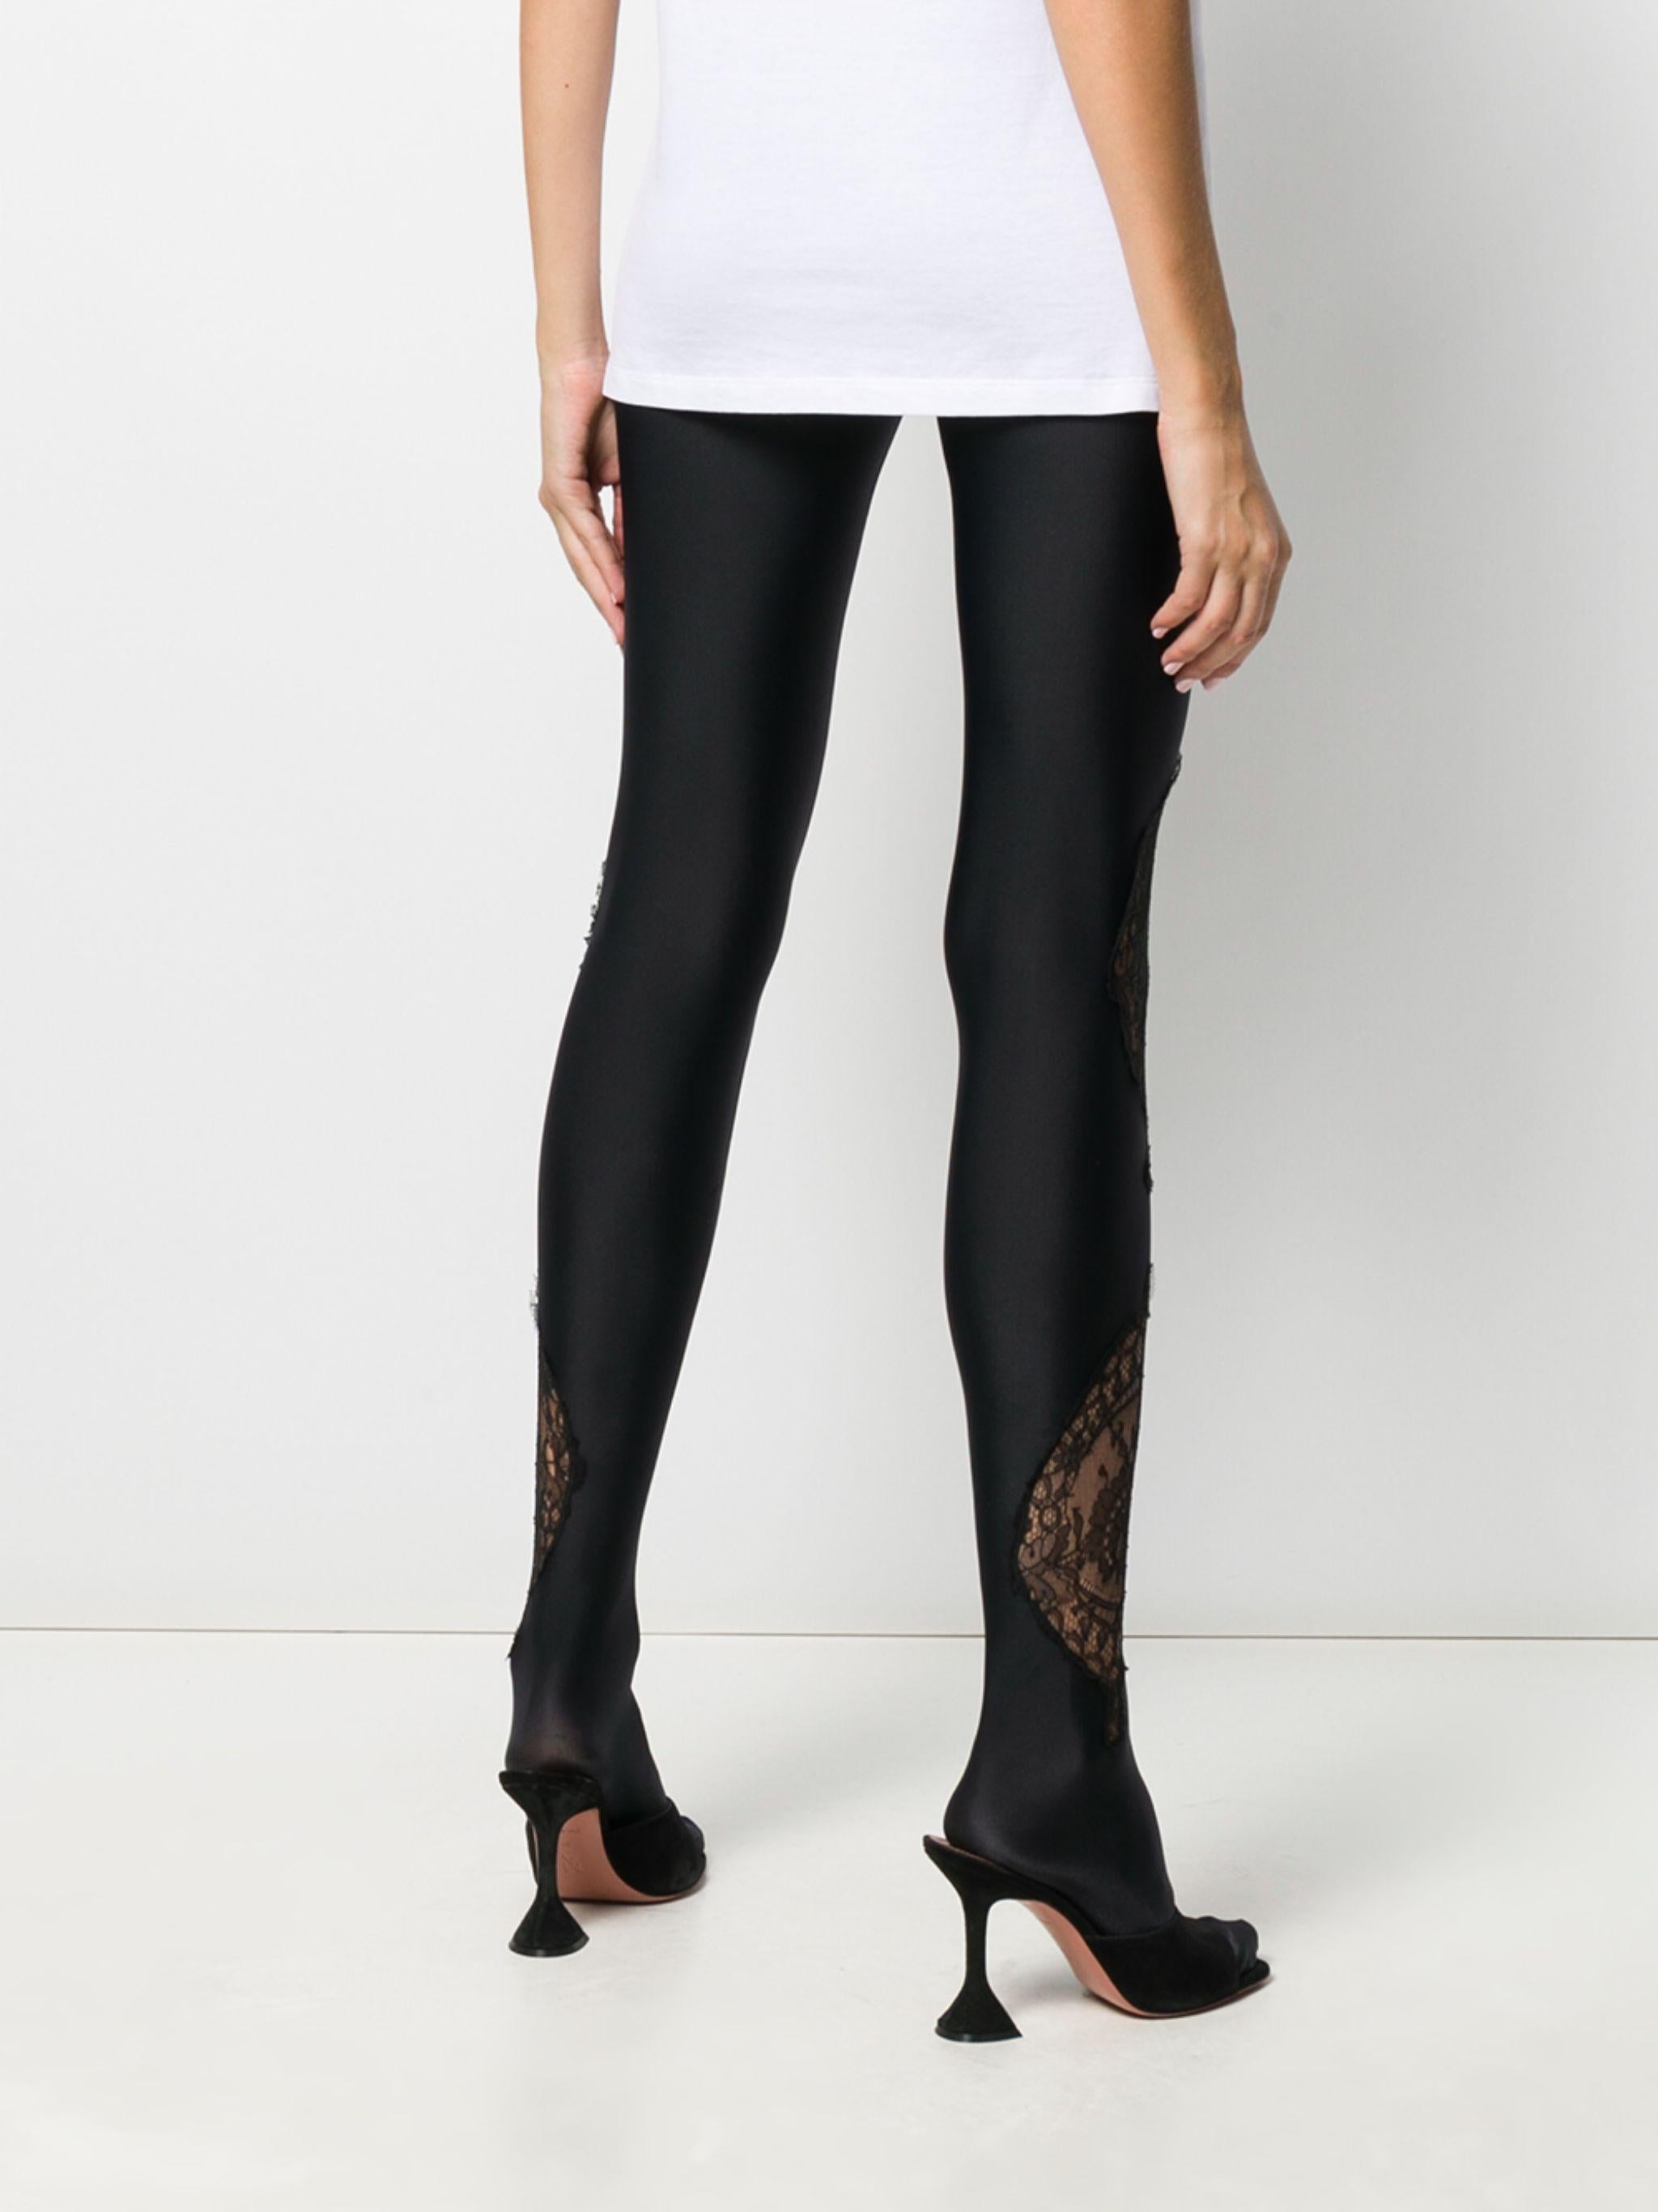 Versace Fall 2019 Runway Black Lace Panelled Jersey Leggings / Tights Size 2 9